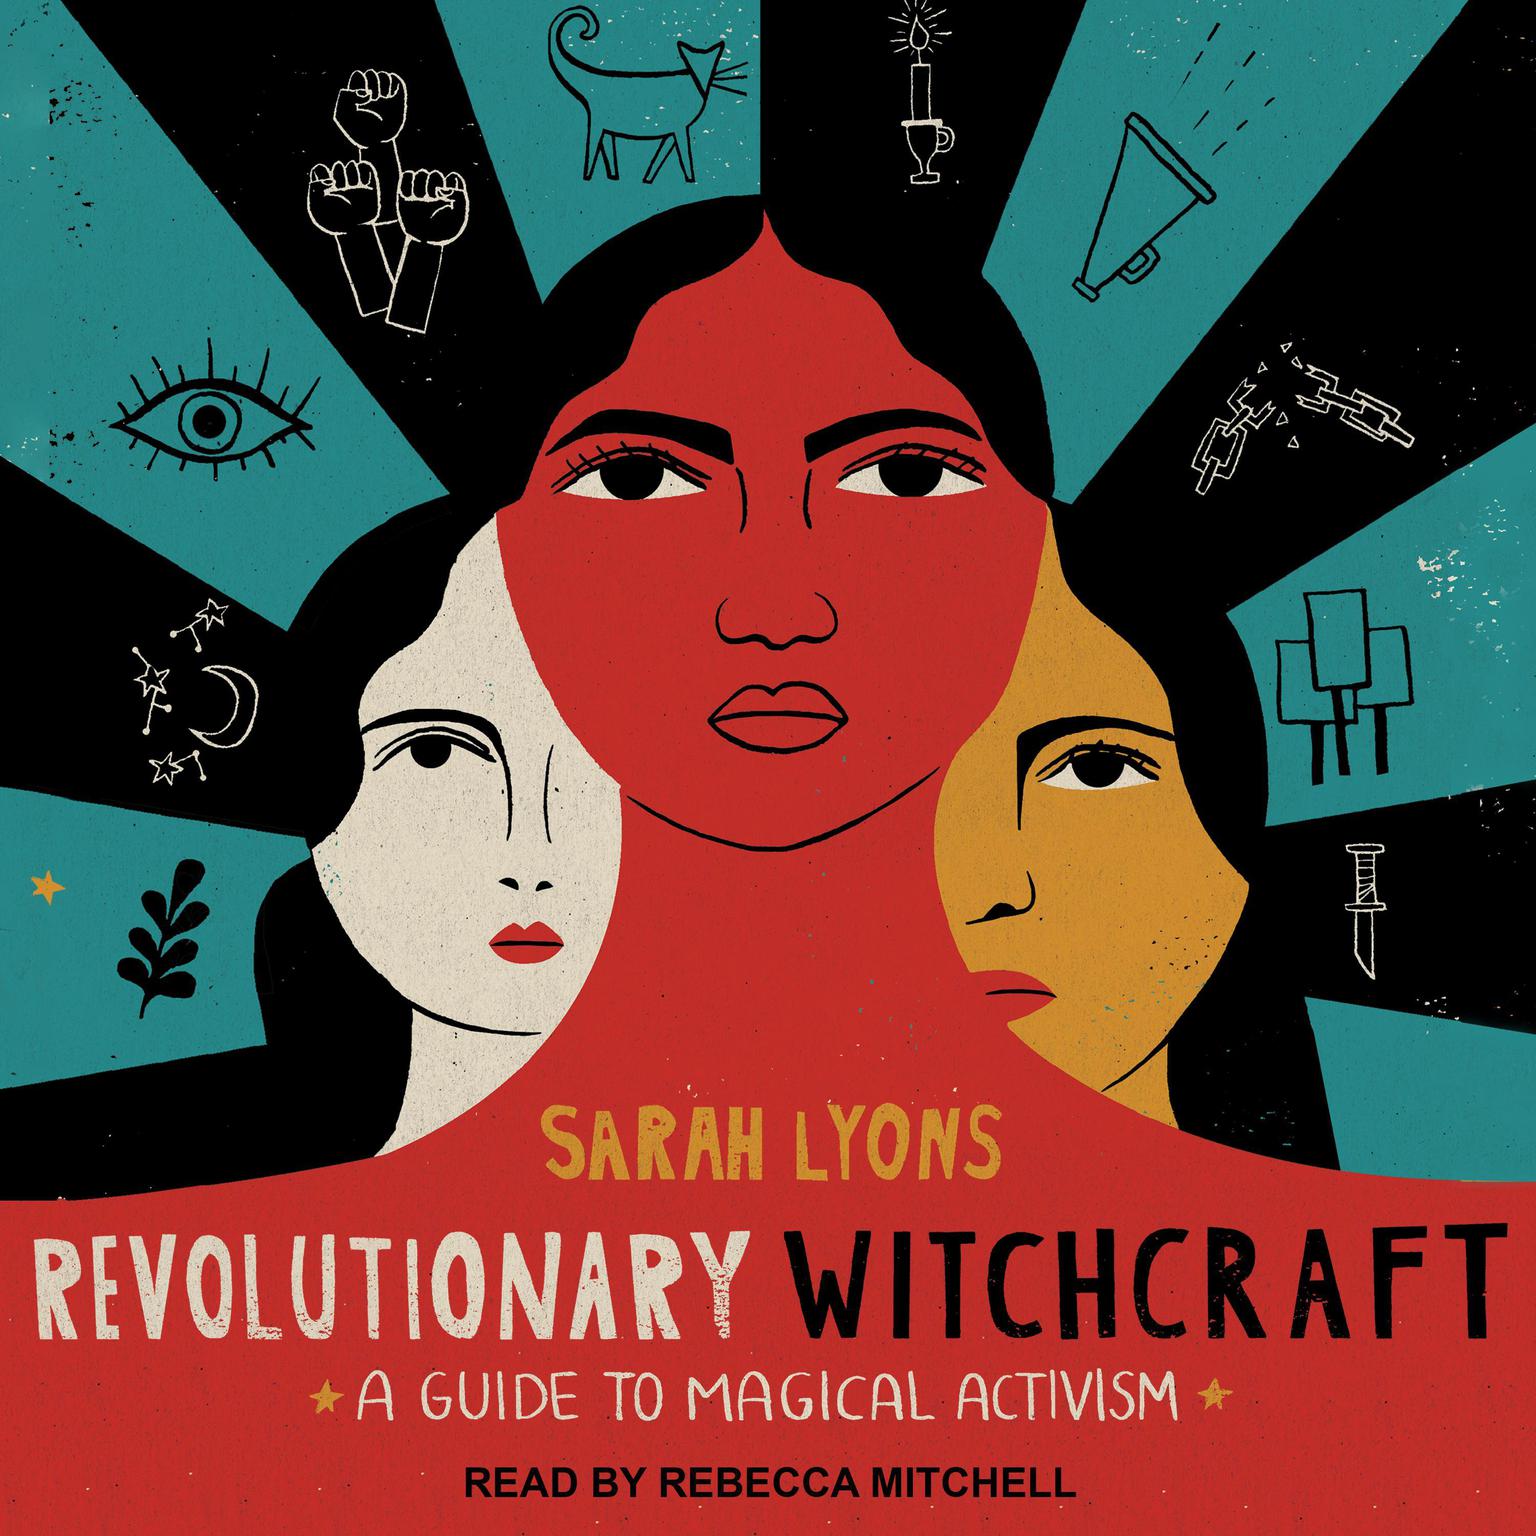 Revolutionary Witchcraft: A Guide to Magical Activism Audiobook, by Sarah Lyons